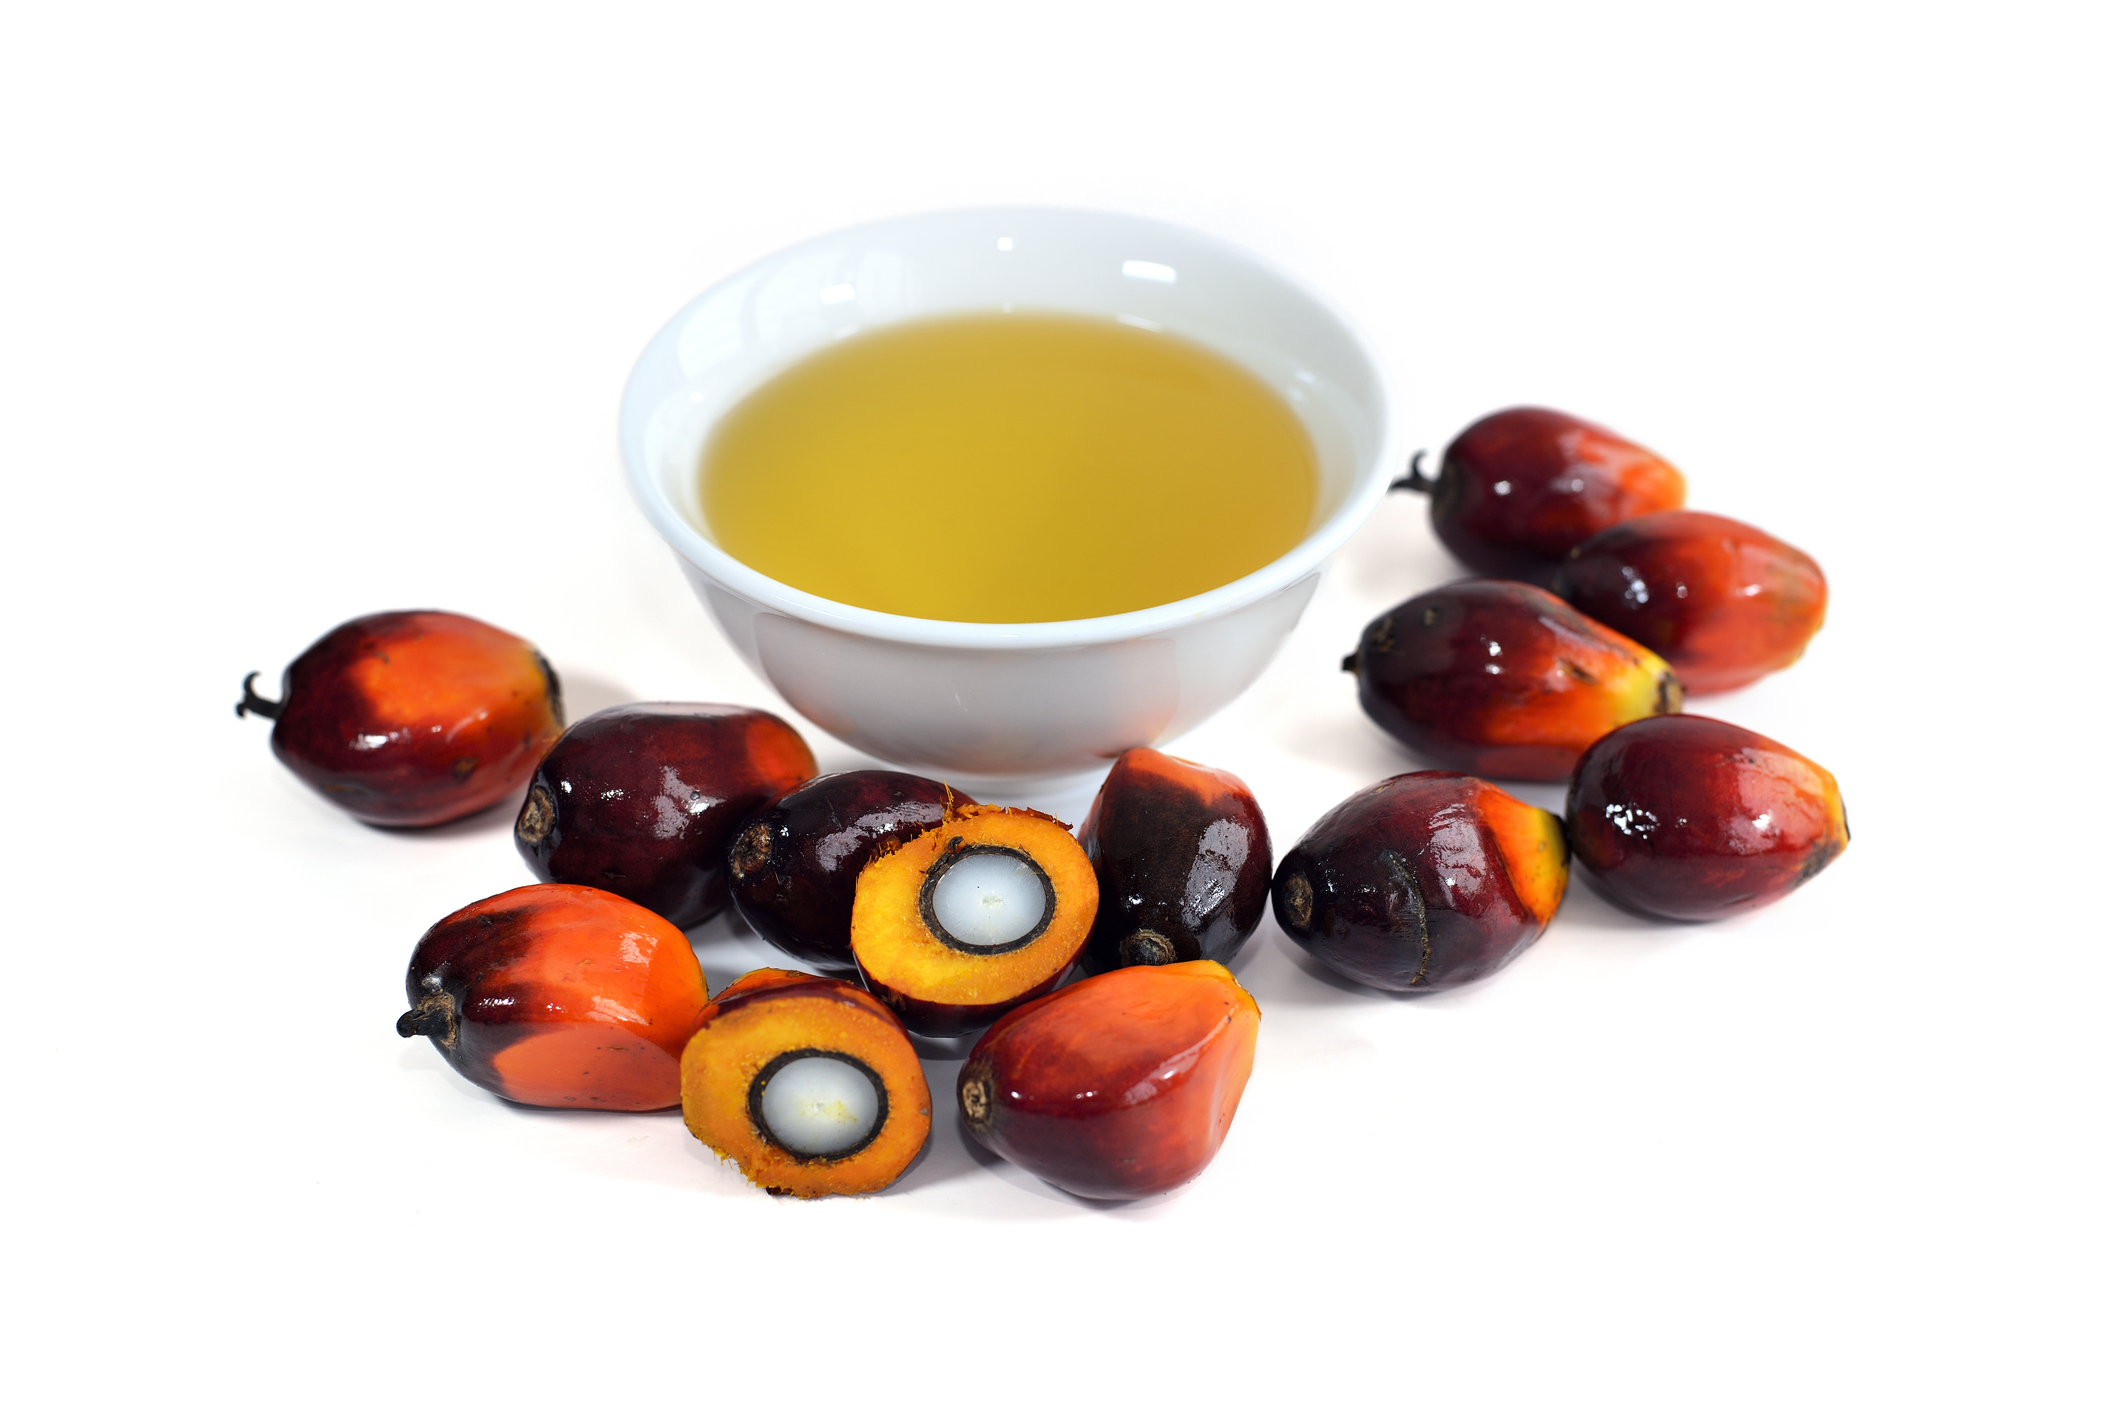 Palm oil, a well-balanced healthy edible oil is now an important energy source for mankind. It comes from the fruit itself (reddish orange). Today it is widely acknowledged as a versatile and nutritious vegetable oil, trans fat free with a rich content of vitamins and antioxidants.